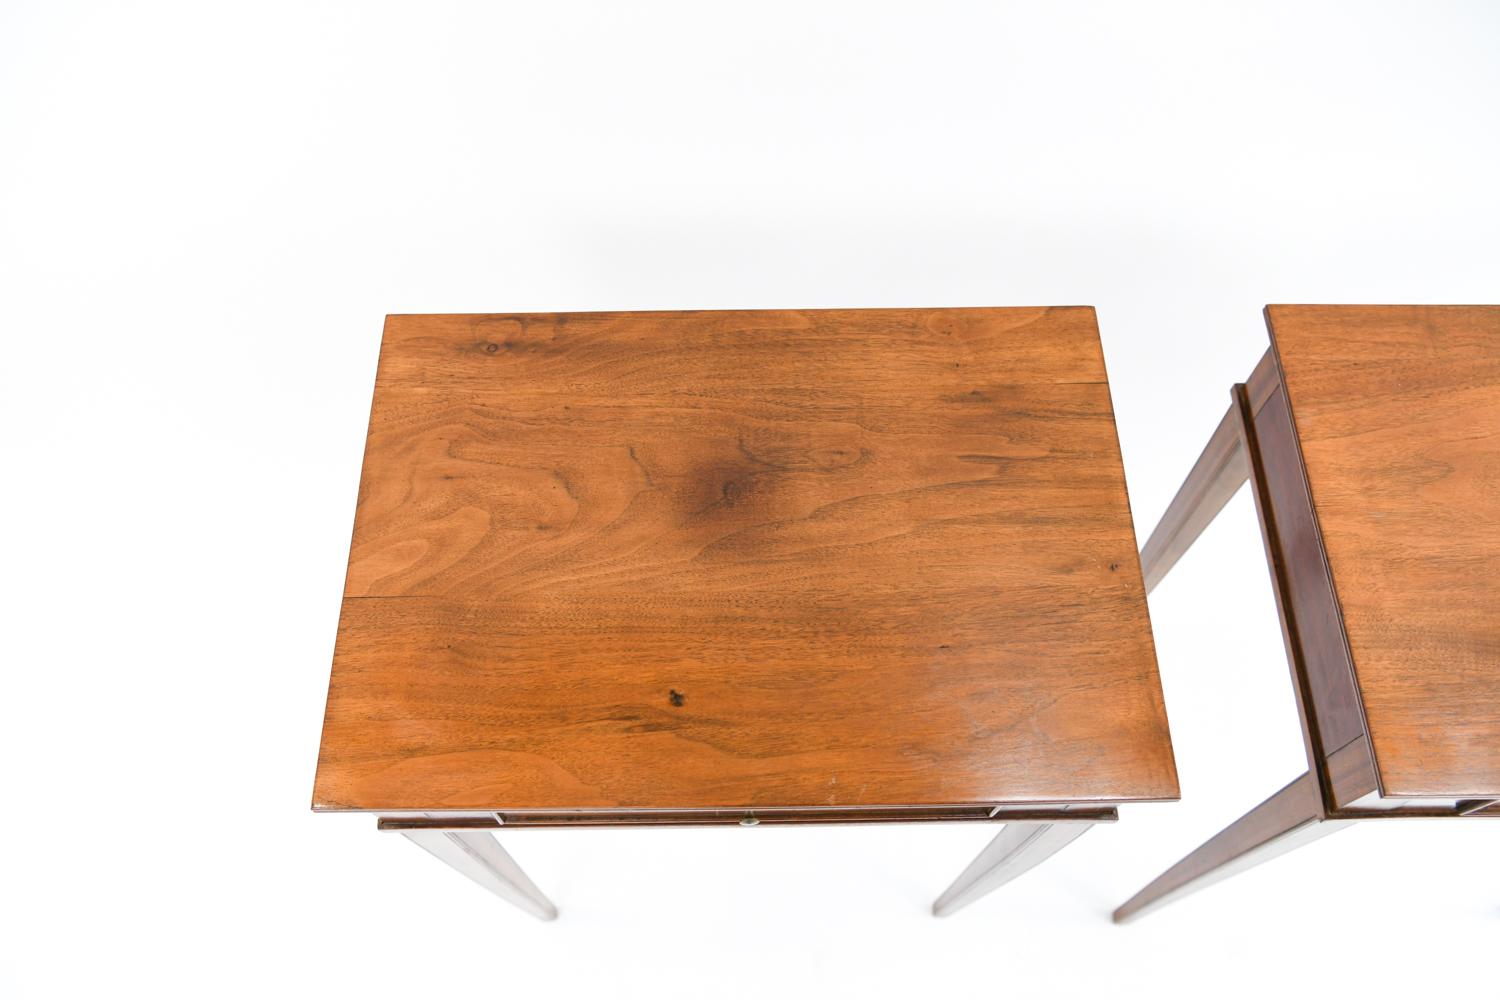 This pair of mahogany nightstands by Frits Henningsen sits on the line between traditional and modern Danish design. This transitional period, circa 1940s, is embodied by the iconic designer Frits Henningsen. These side tables or nightstands have